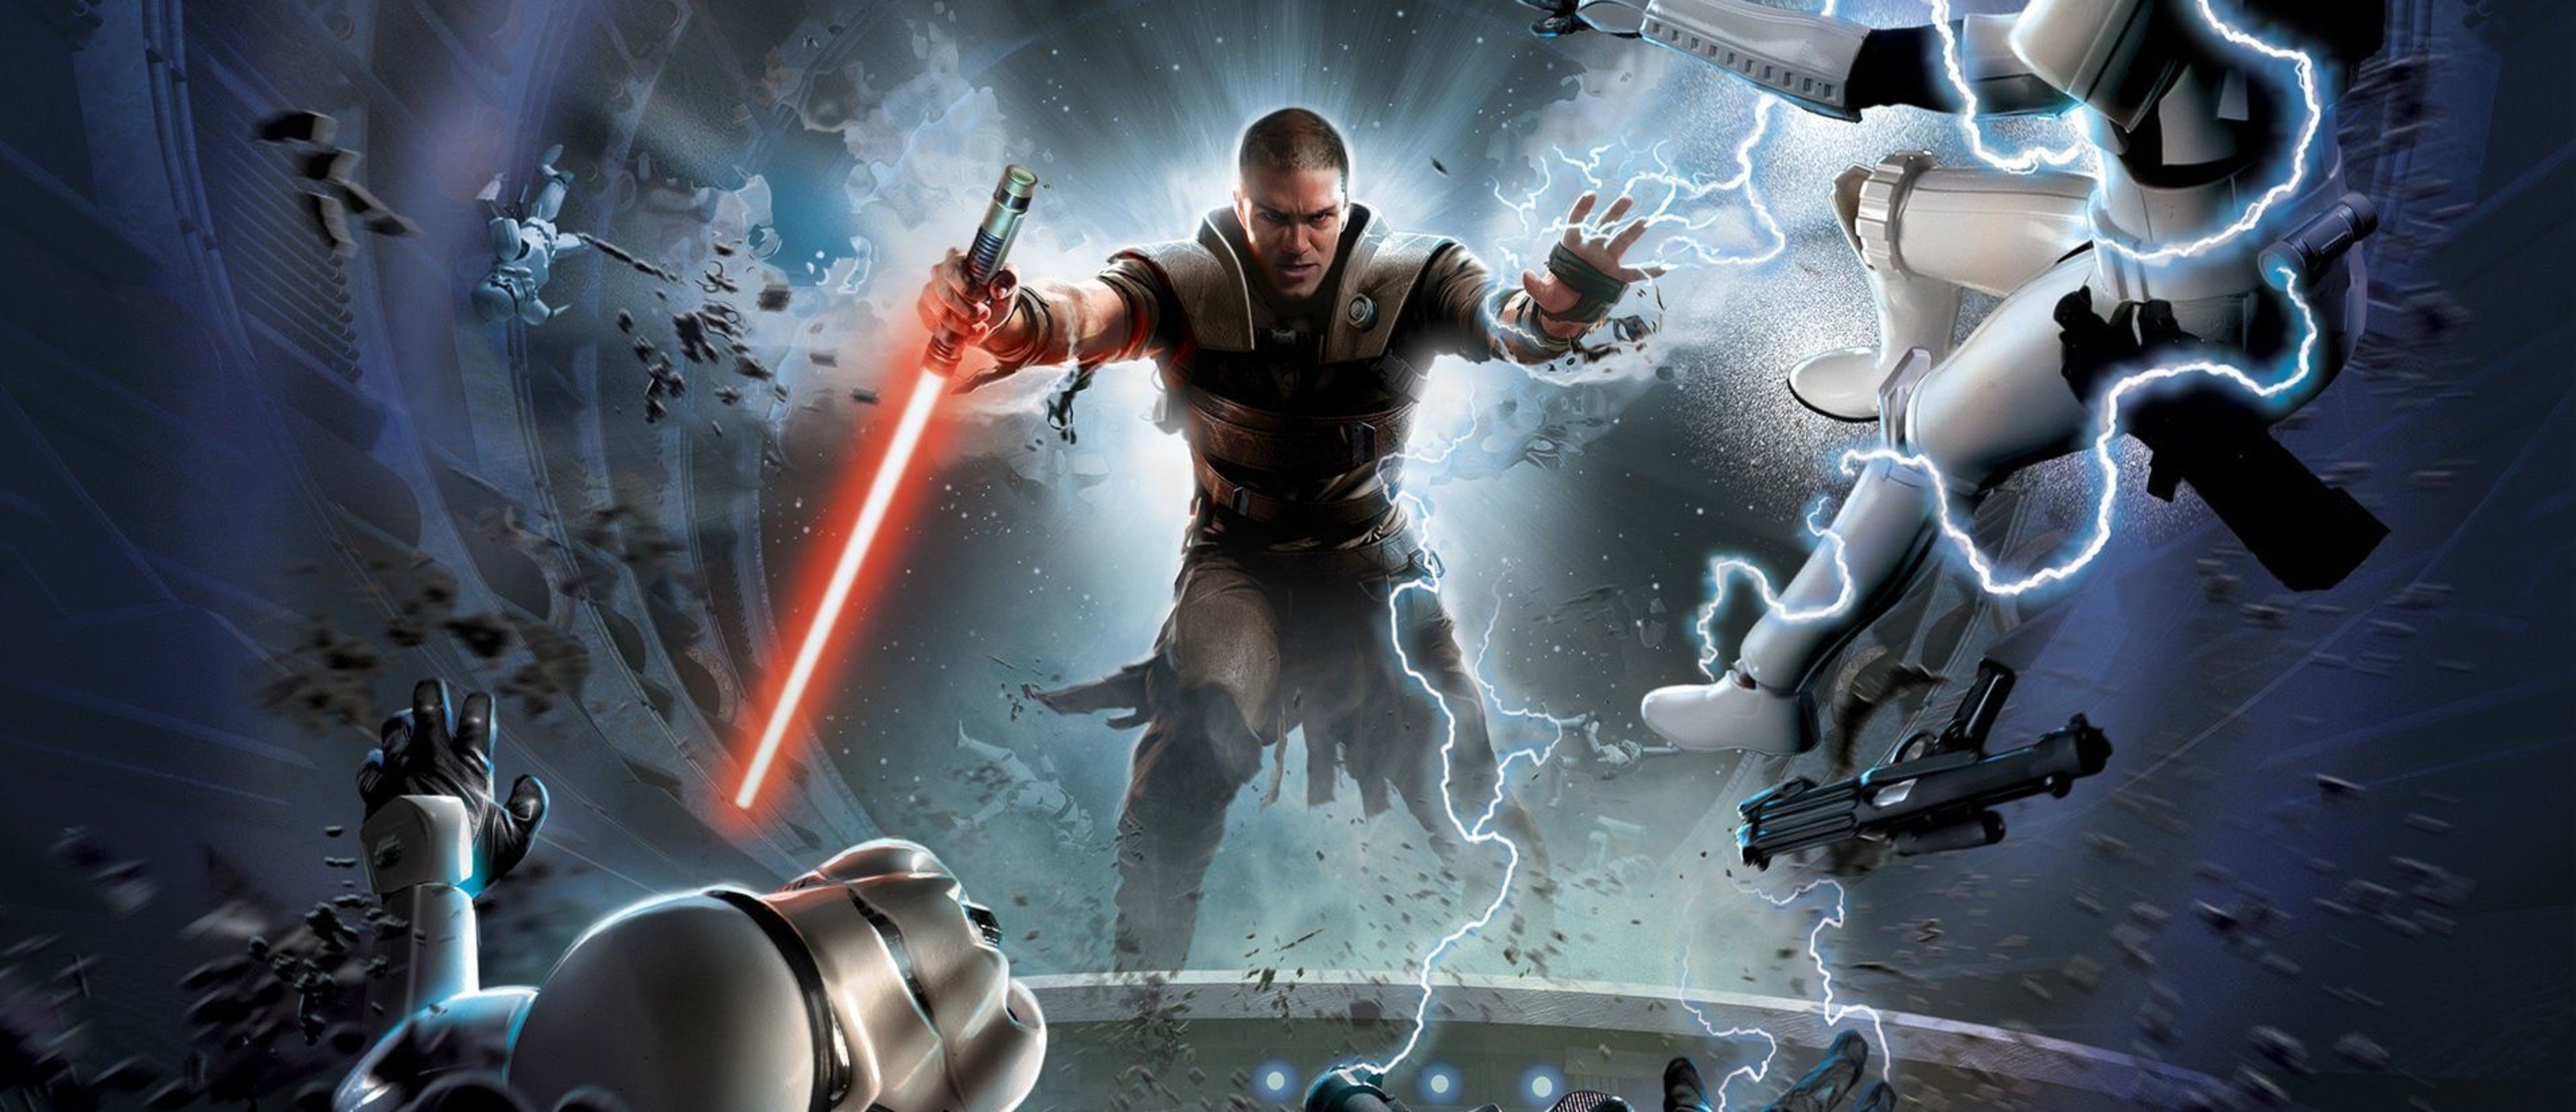 Игра star wars the force unleashed. Star Wars Starkiller игра. Star Wars the Force unleashed Старкиллер. Star Wars unleashed 2 Старкиллер. Star Wars the Force unleashed 1.